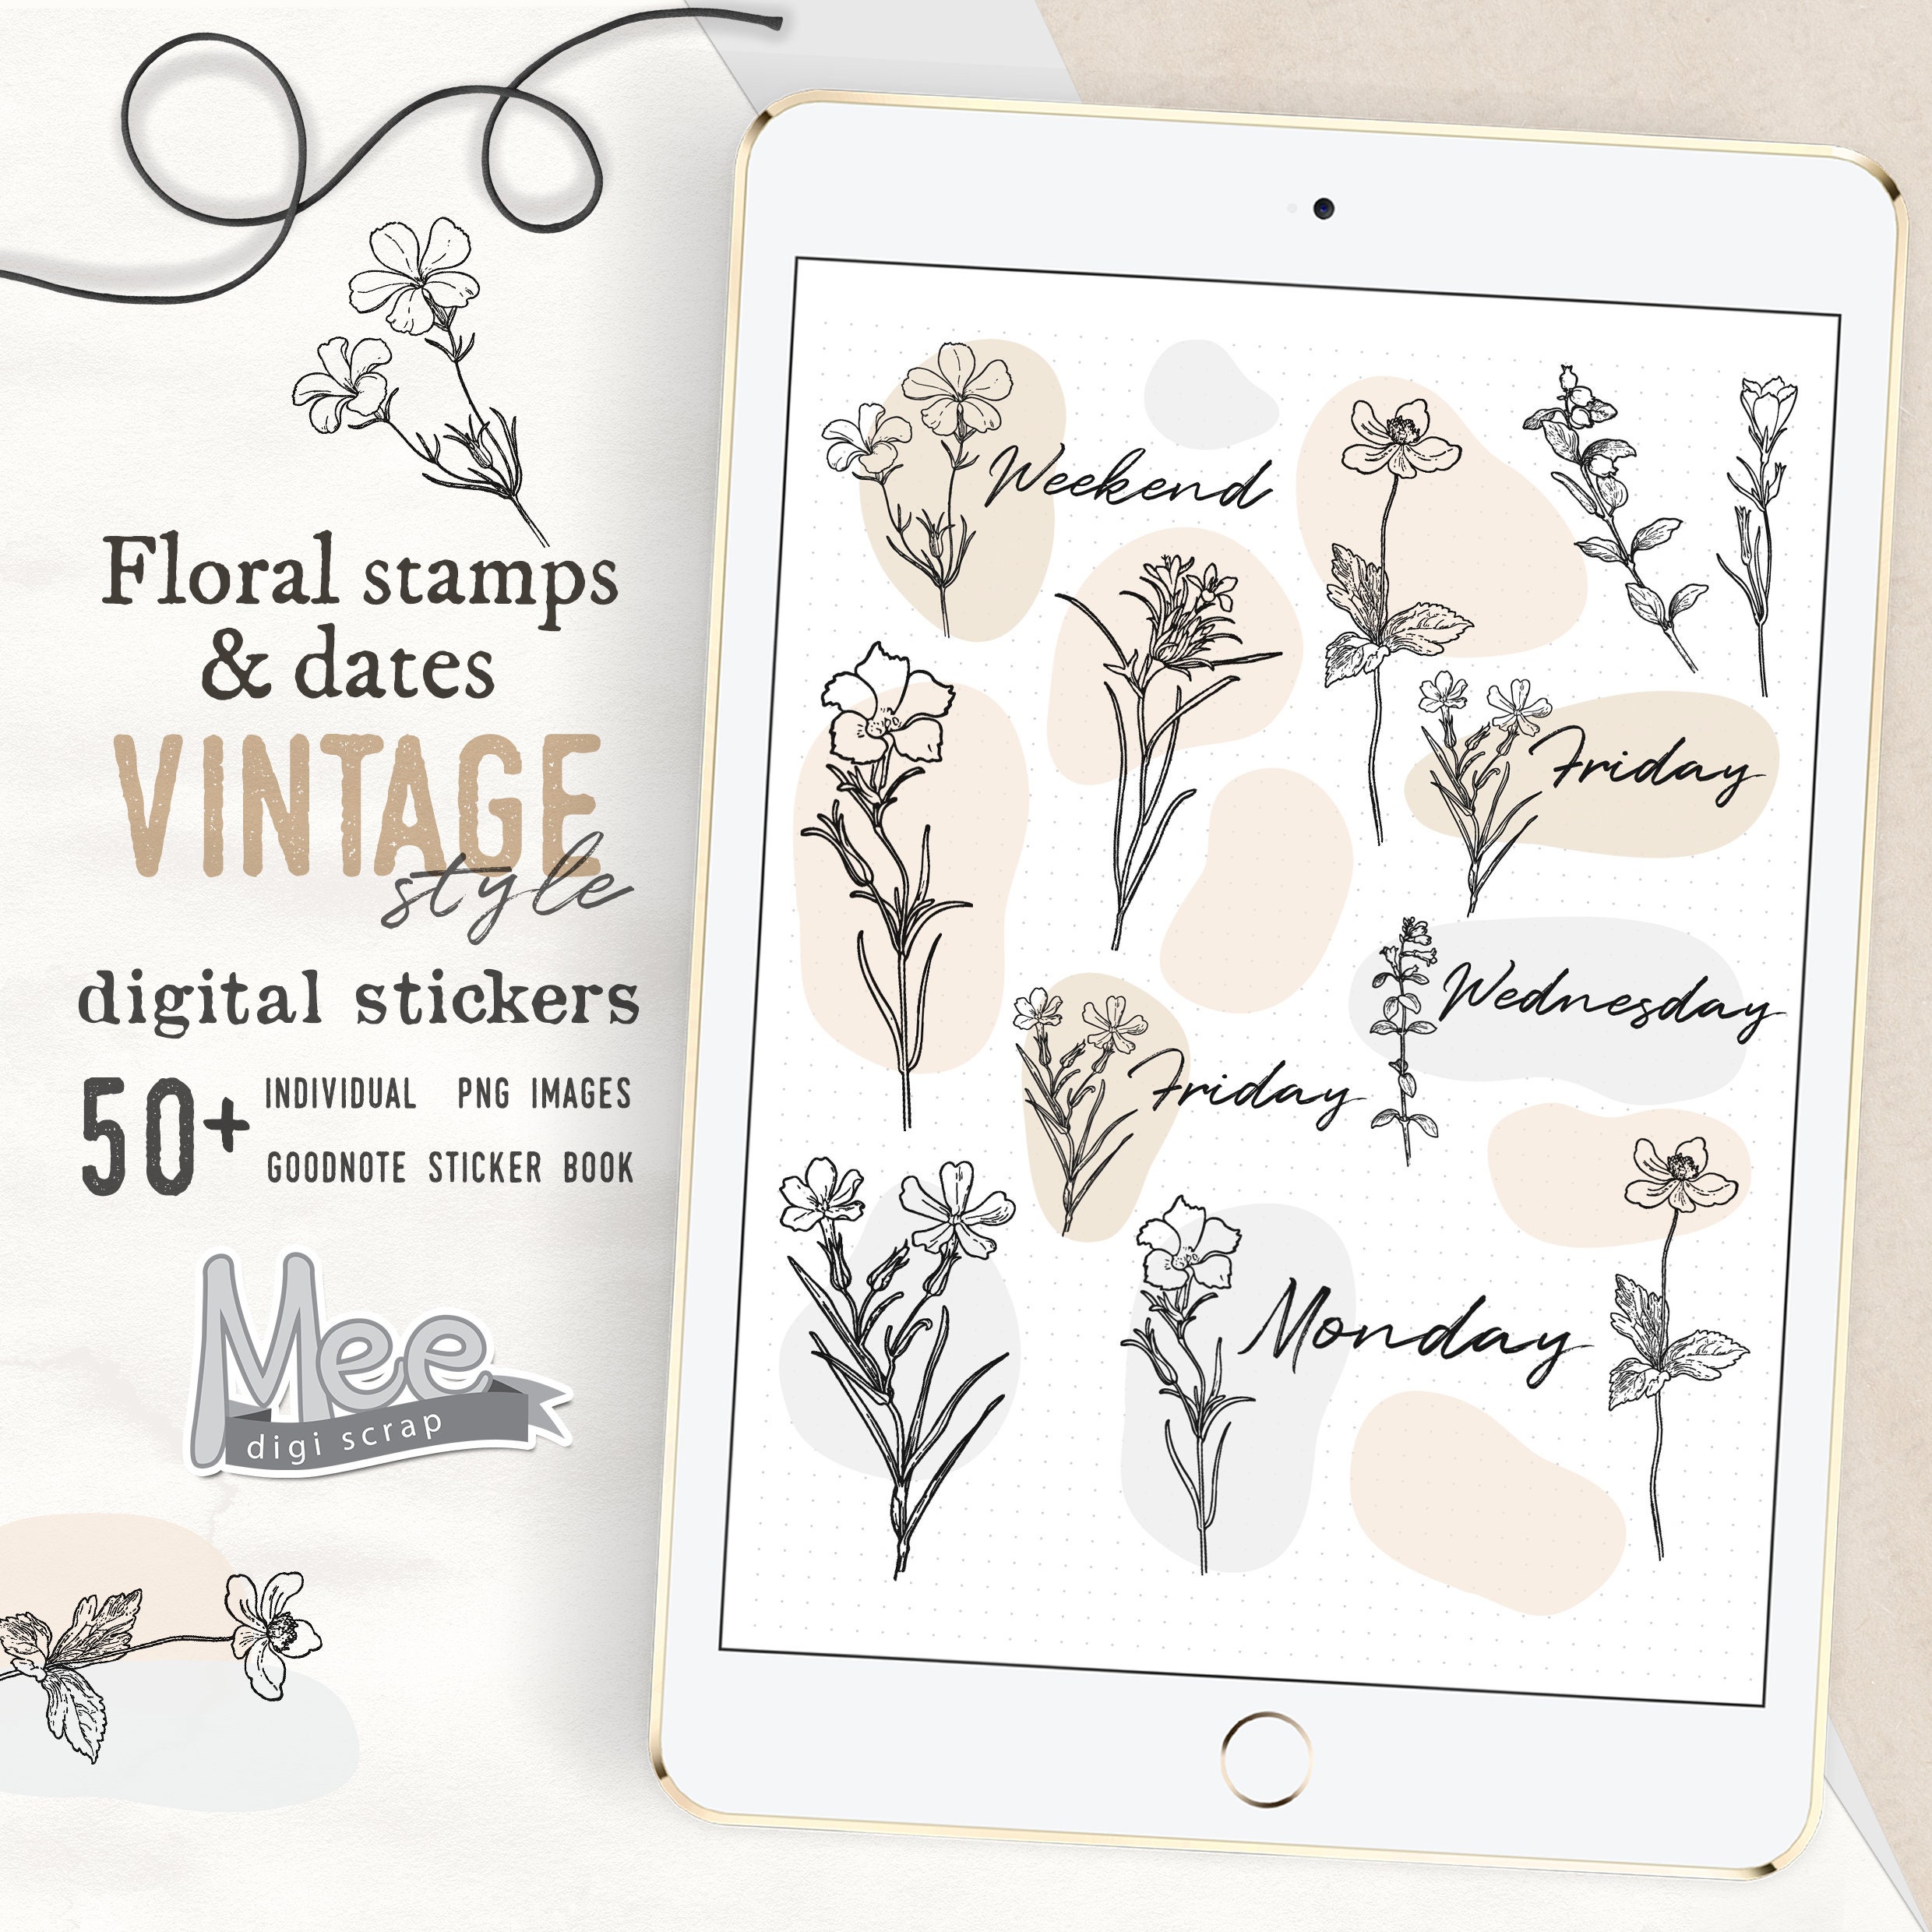 Junk Journal Digital Stickers, Vintage Aesthetic Digital Planner  Stickers,craft Paper Sticky Notes,for Use With Digital Planner and Journal  